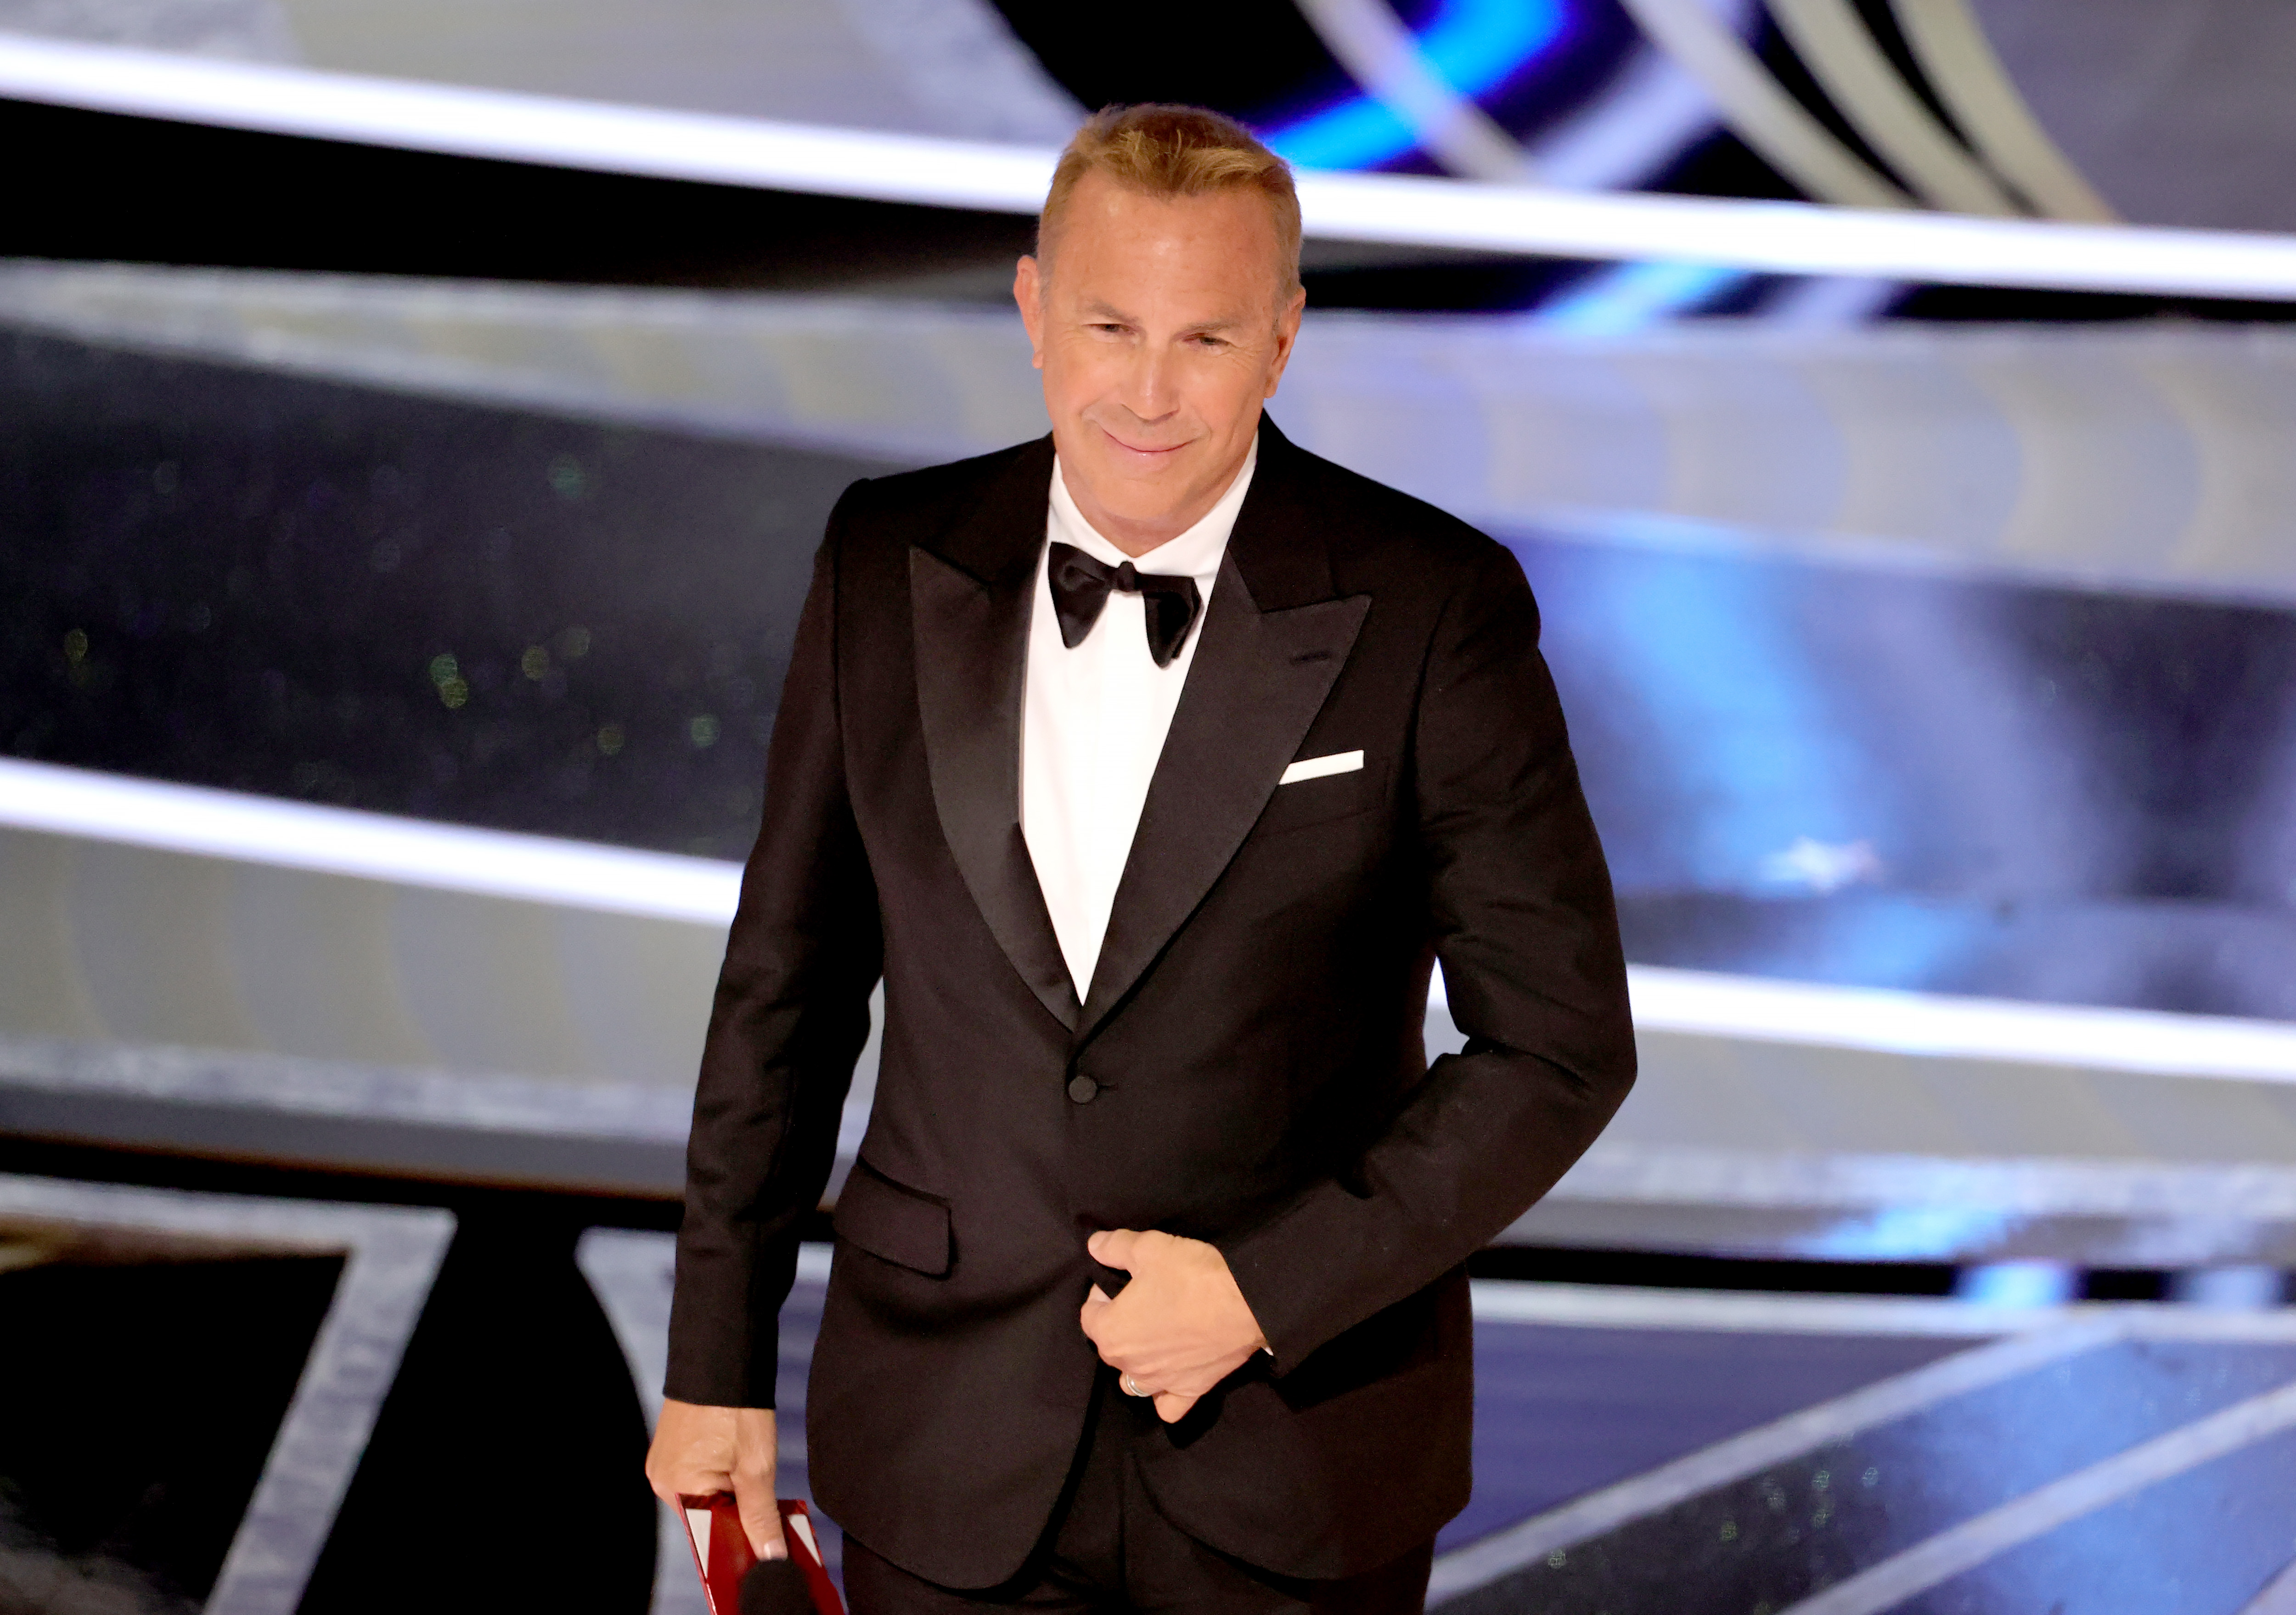 Kevin Costner speaks onstage during the 94th Annual Academy Awards in Hollywood, California, on March 27, 2022. | Source: Getty Images